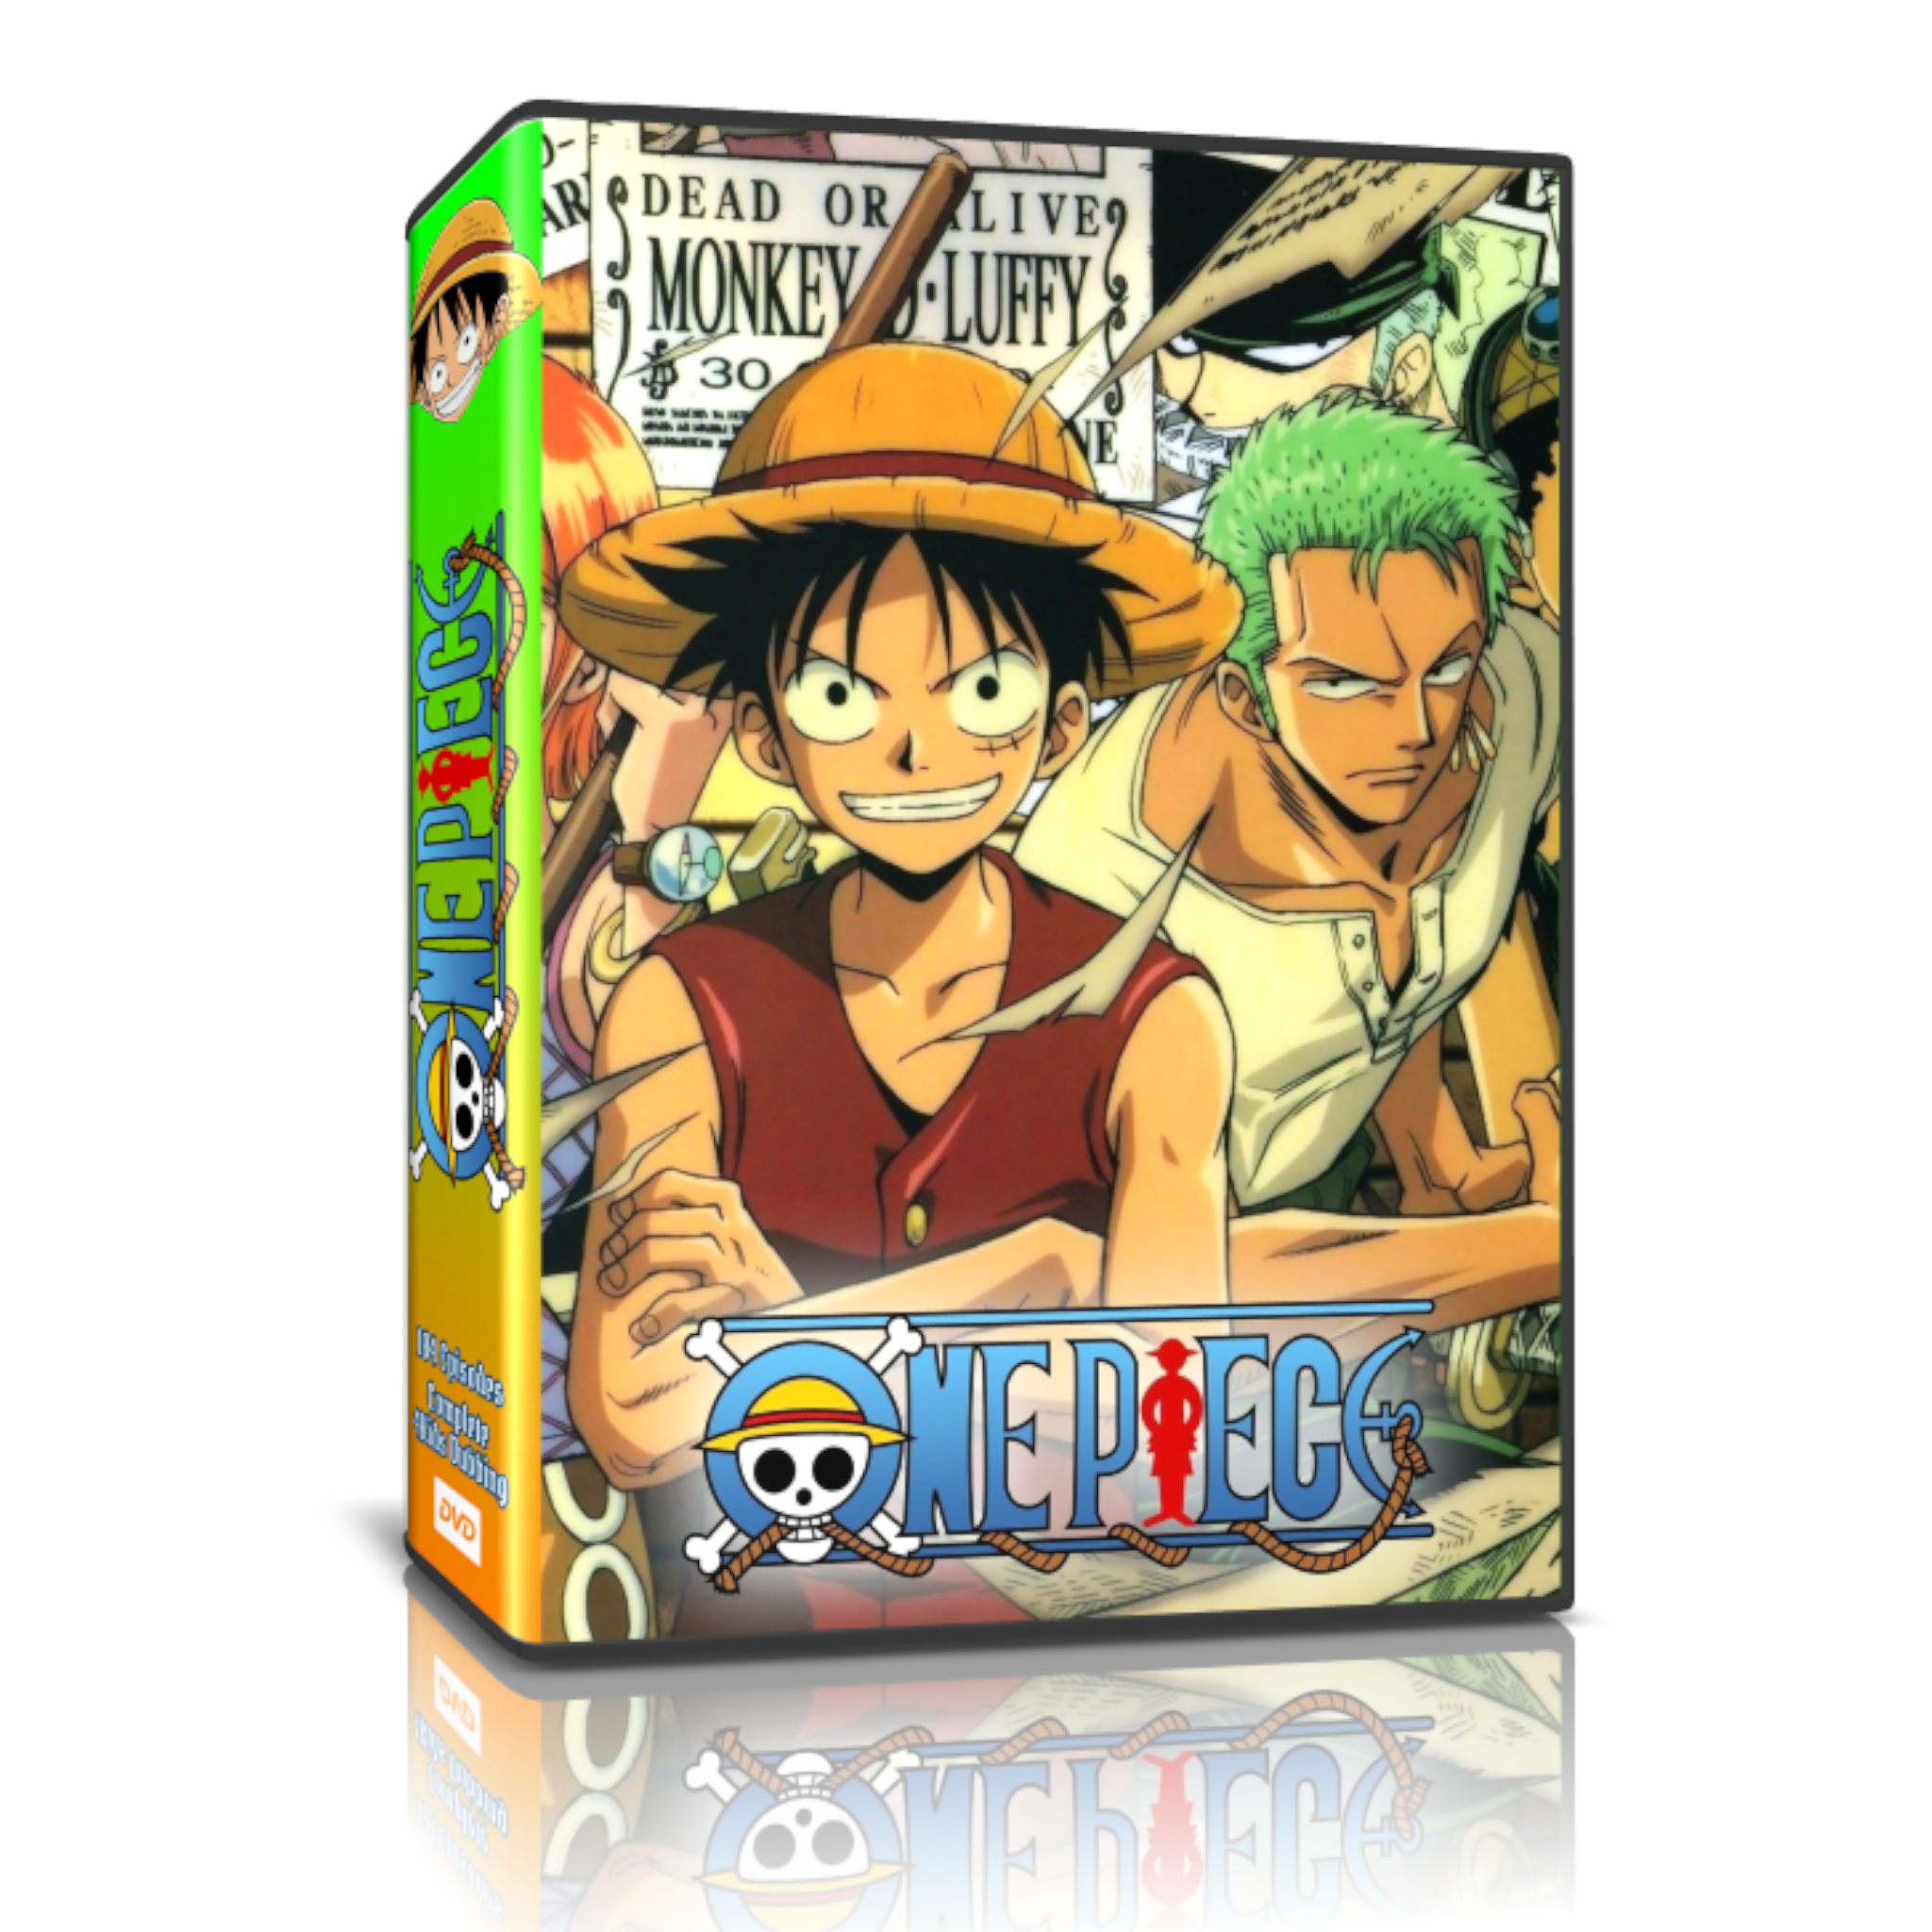 ONE PIECE (1-720) - ANIME TV SERIES DVD (1-720 EPS)(ENGLISH DUBBED) SHIP  FROM US